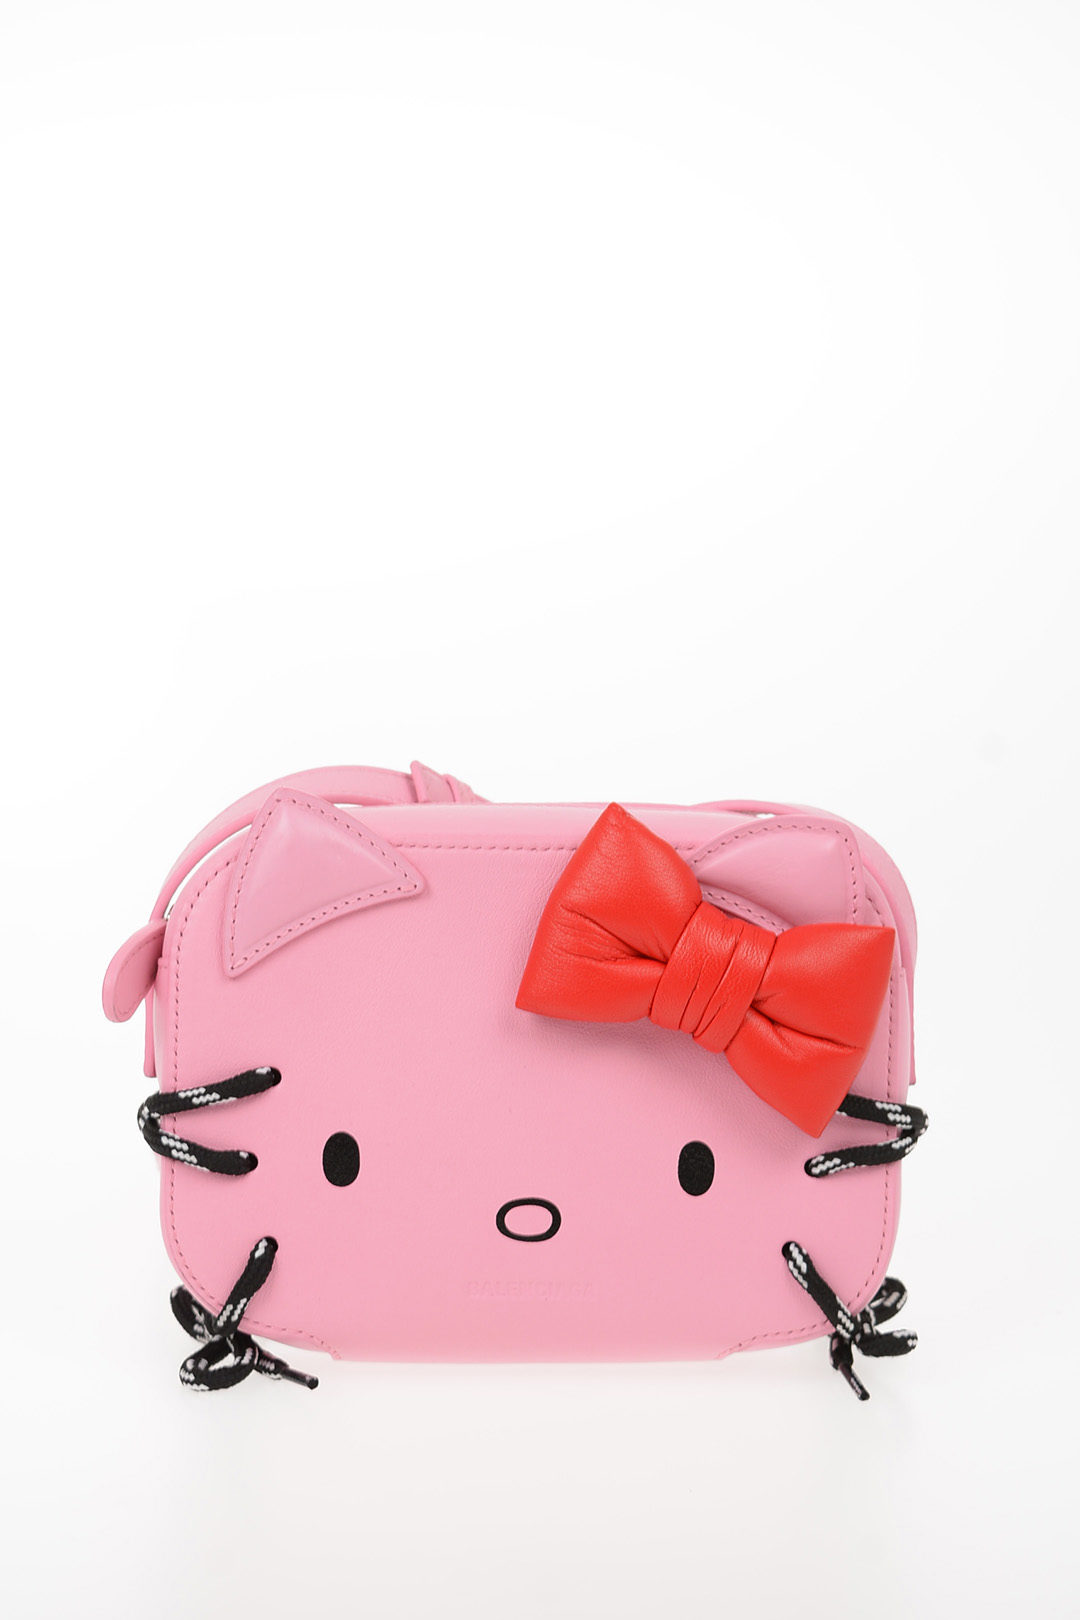 Balenciaga Leather Mini Wallet HELLO KITTY With Removable Shoulder Strap  women - Glamood Outlet